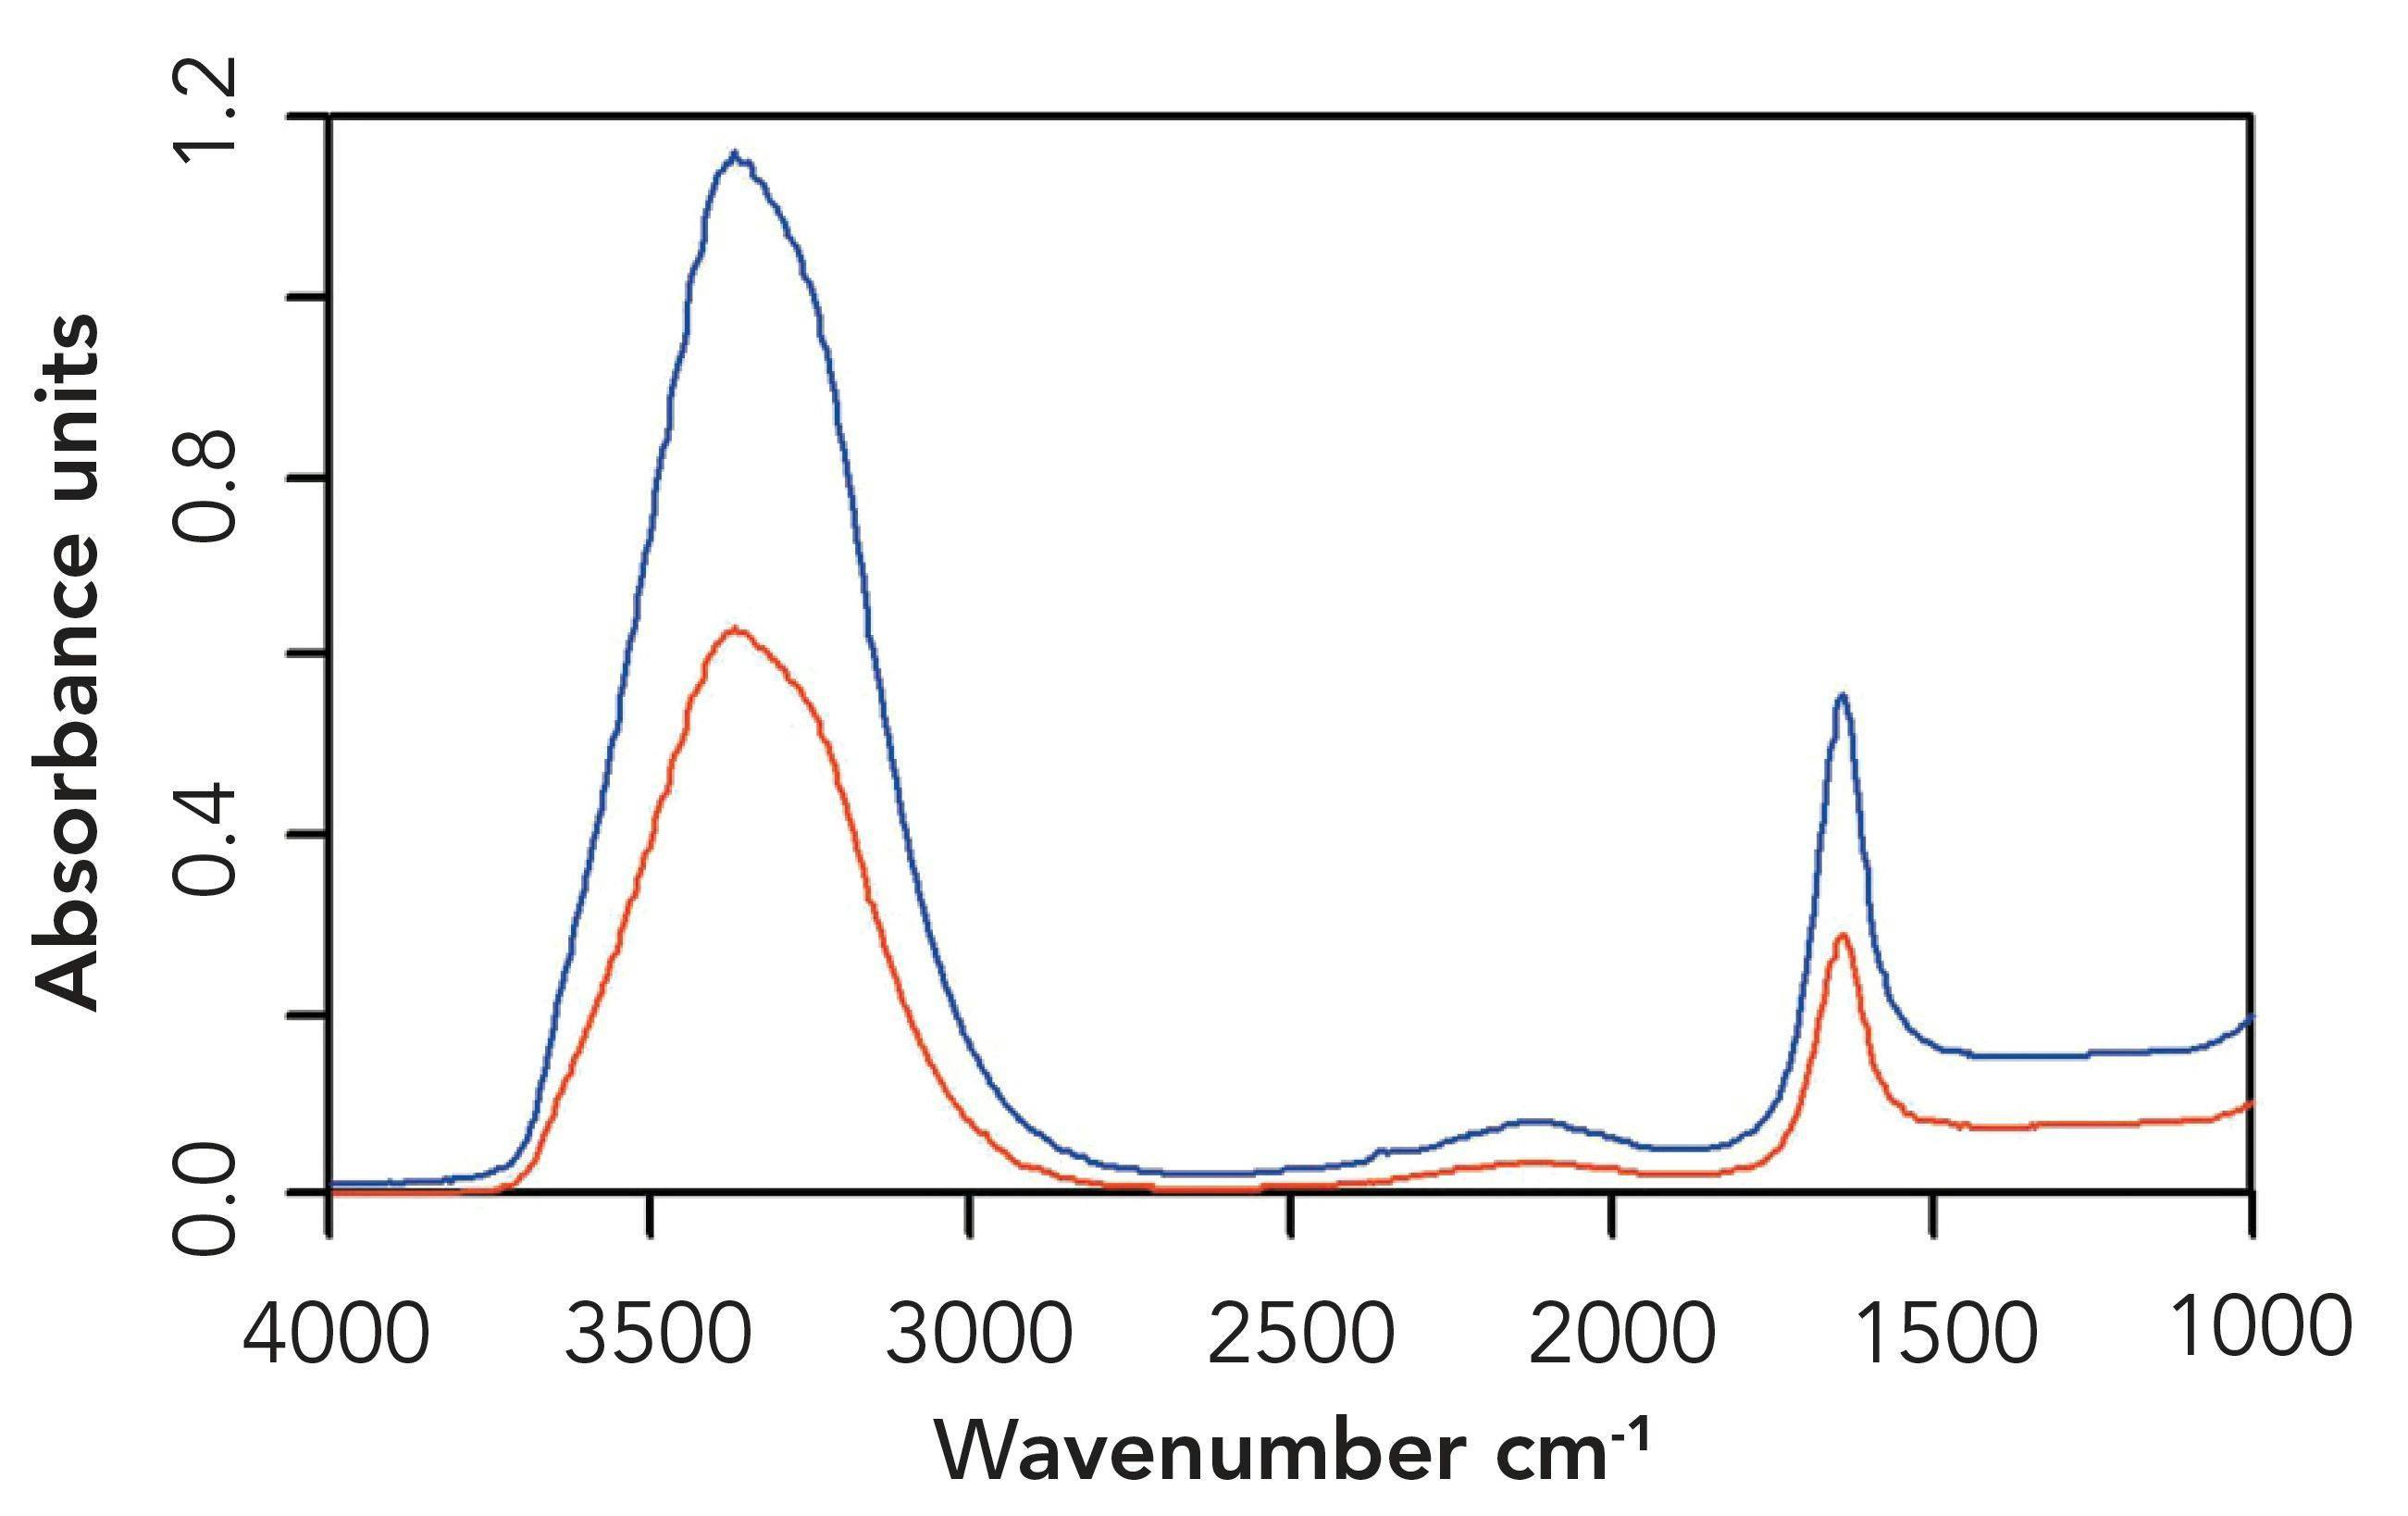 Figure 1: ATR spectra of water recorded with the polarizer set to 90 (red) and 0 (blue).